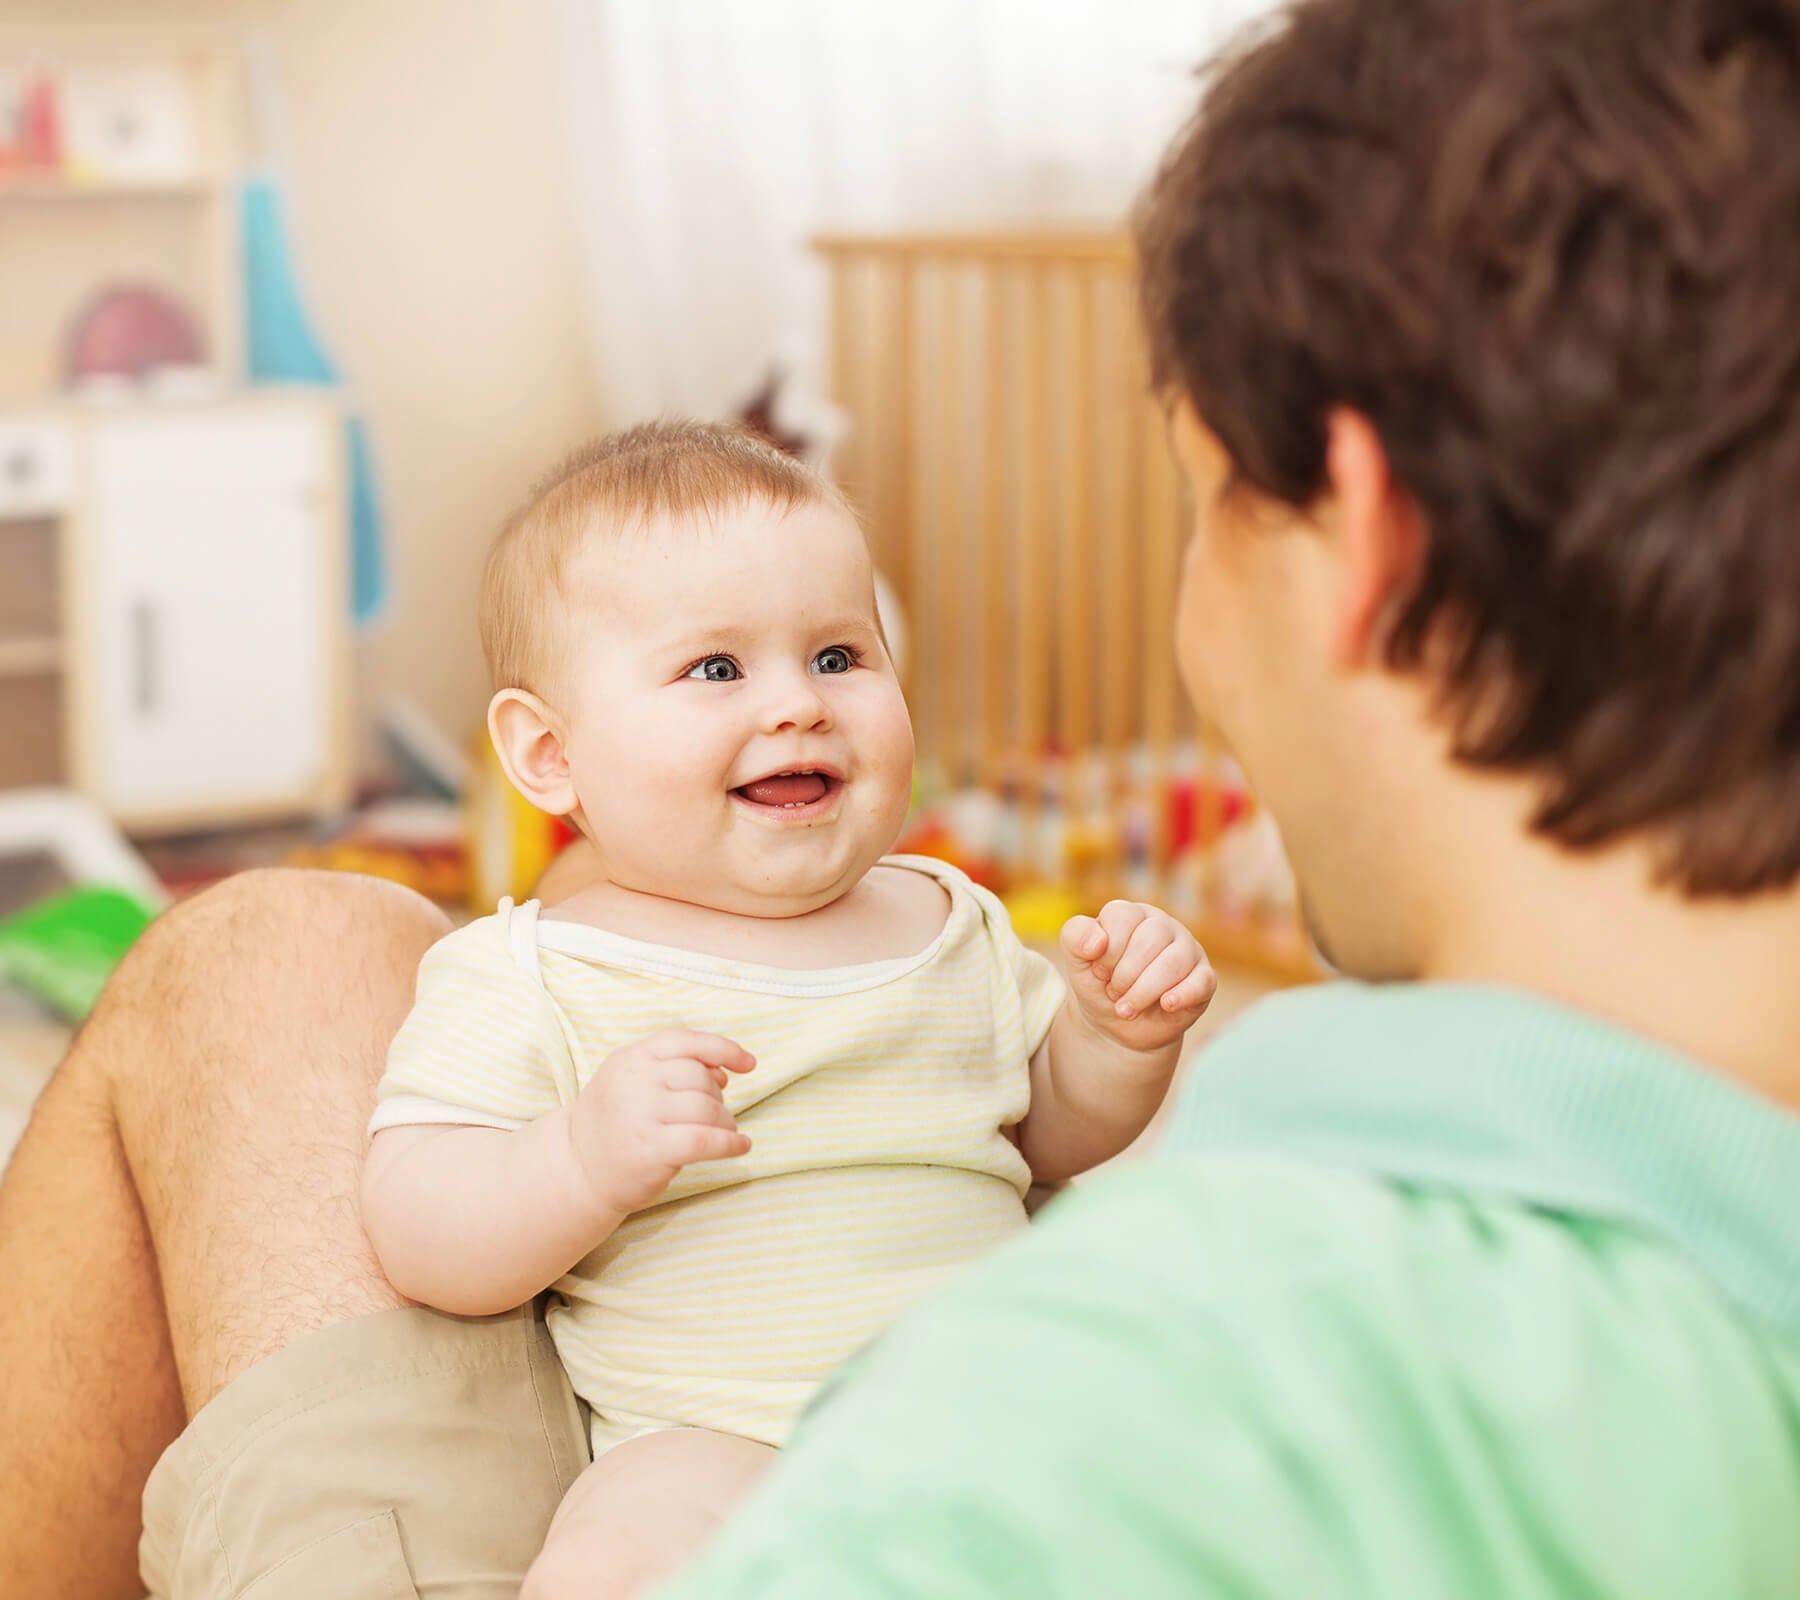 Early Detection of Language Delays; Why Well-Child Visits are Important